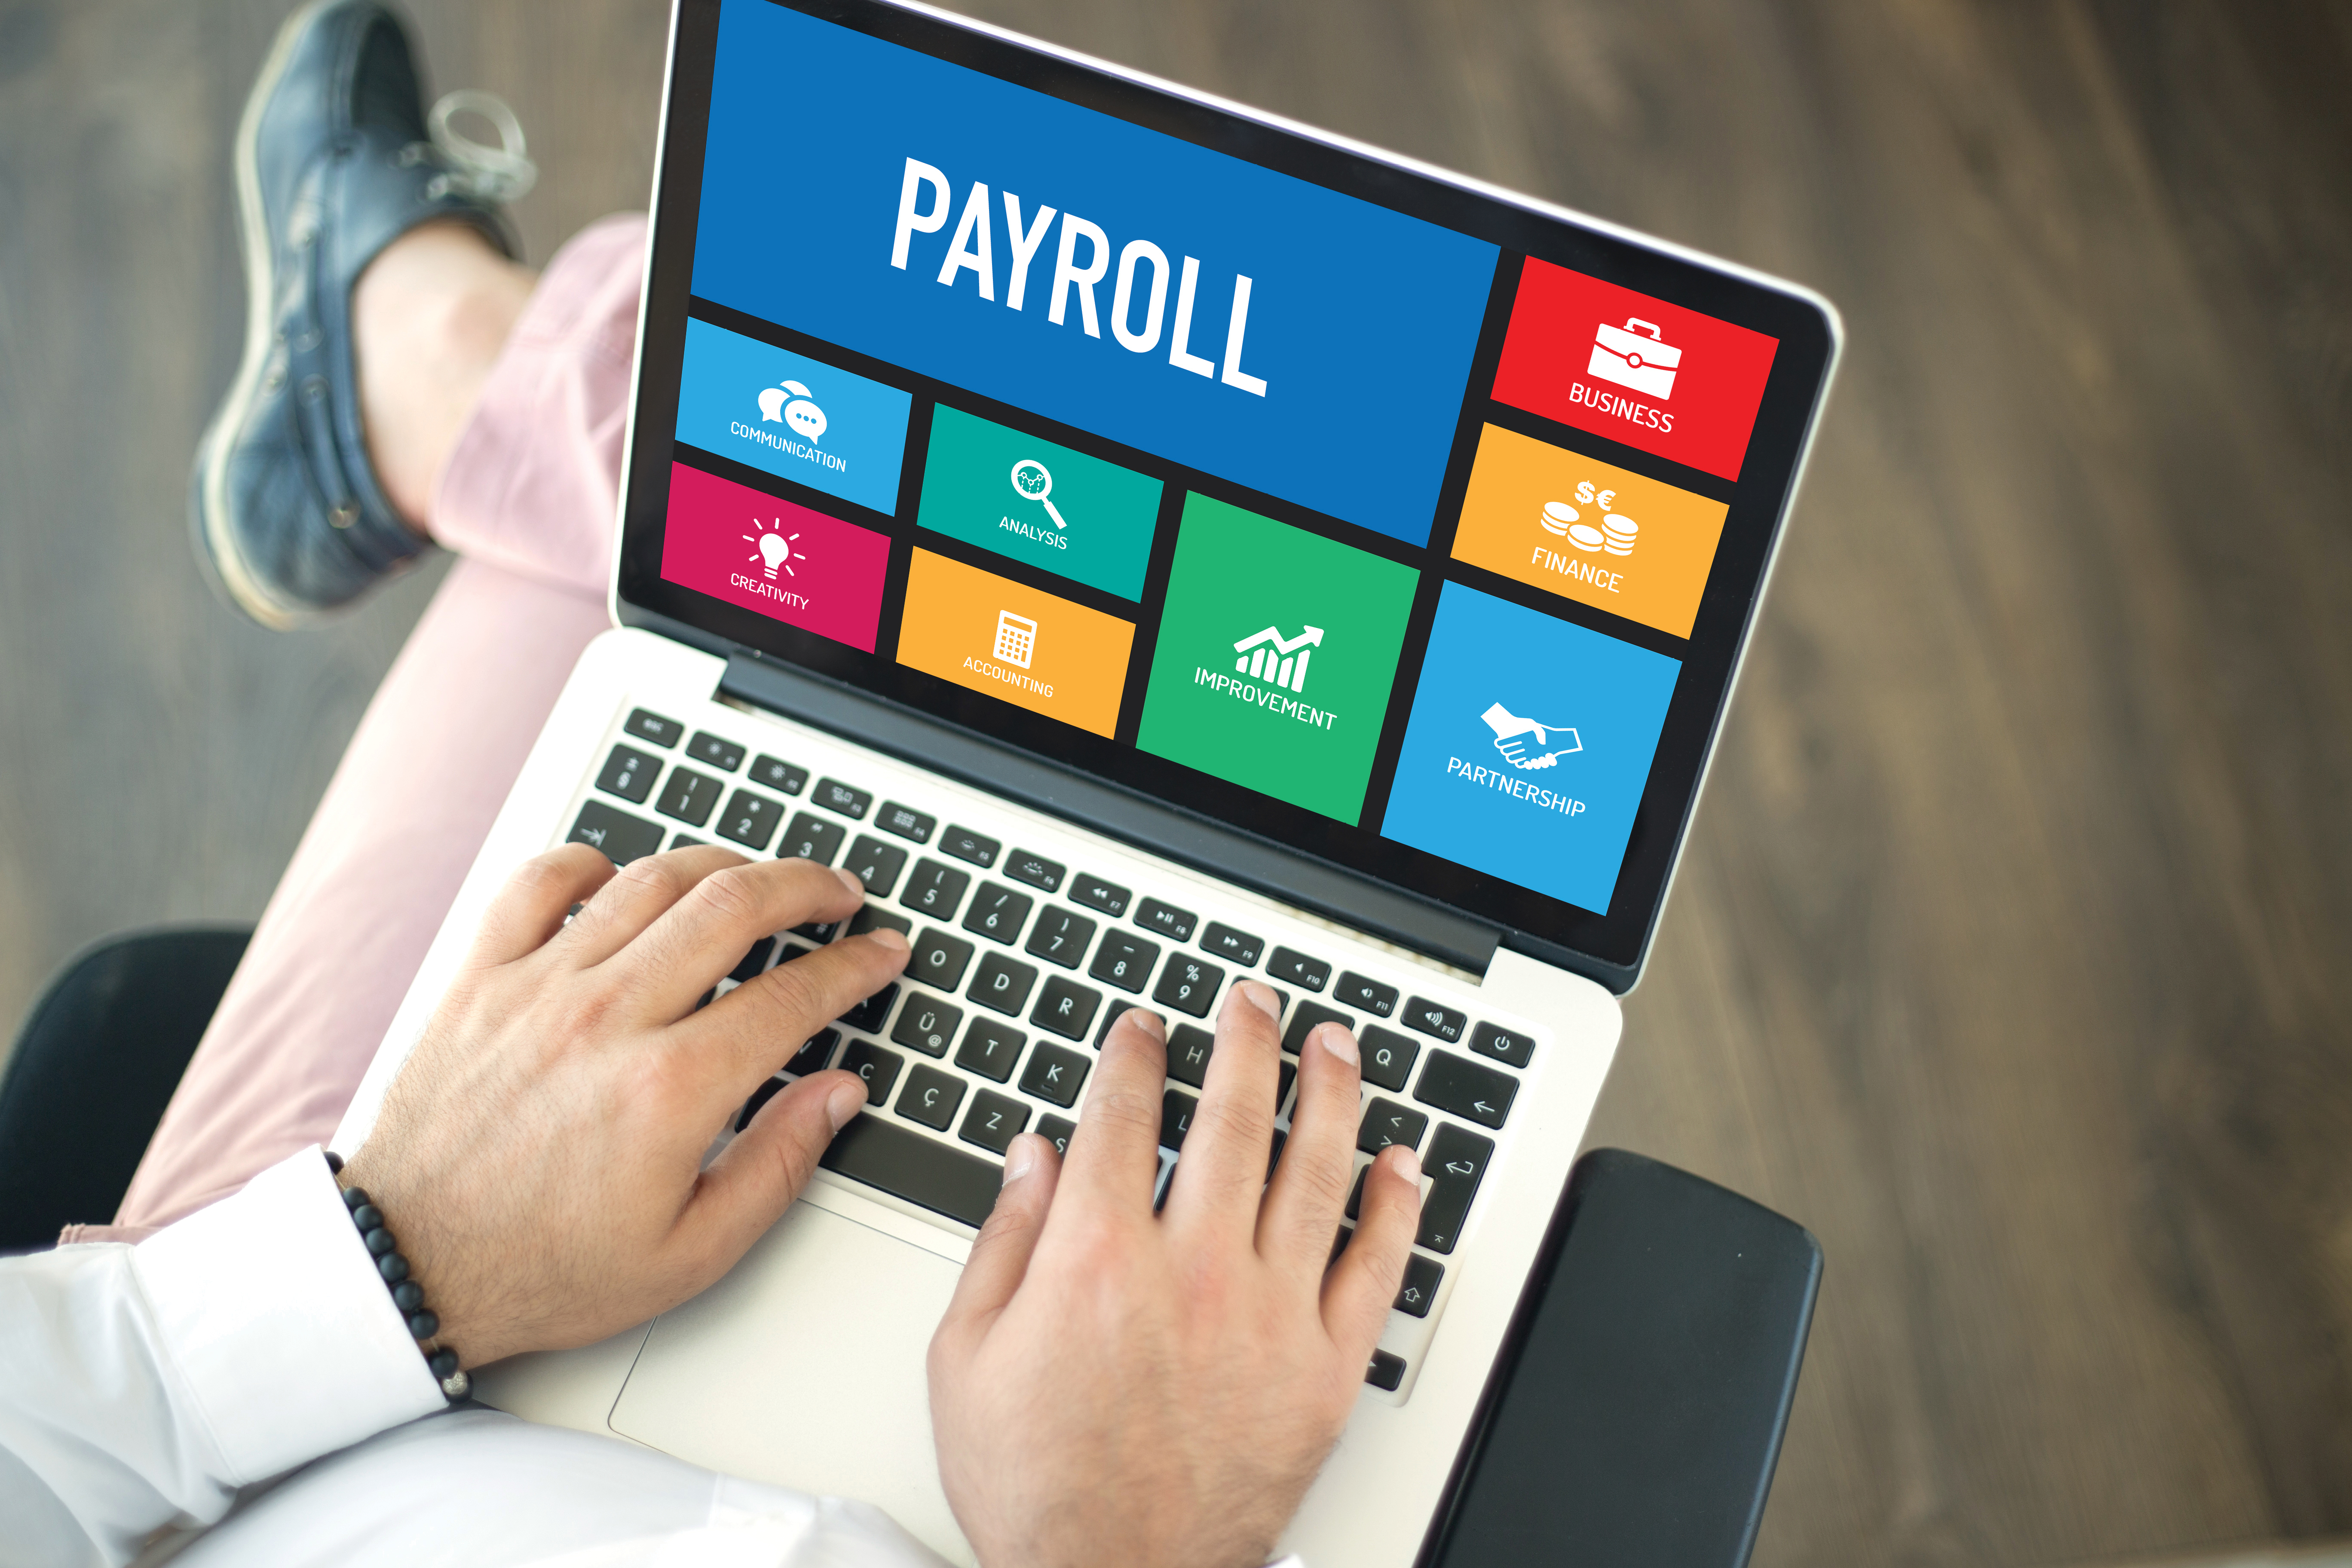 Did you know that SAP Business One can integrate with payroll?